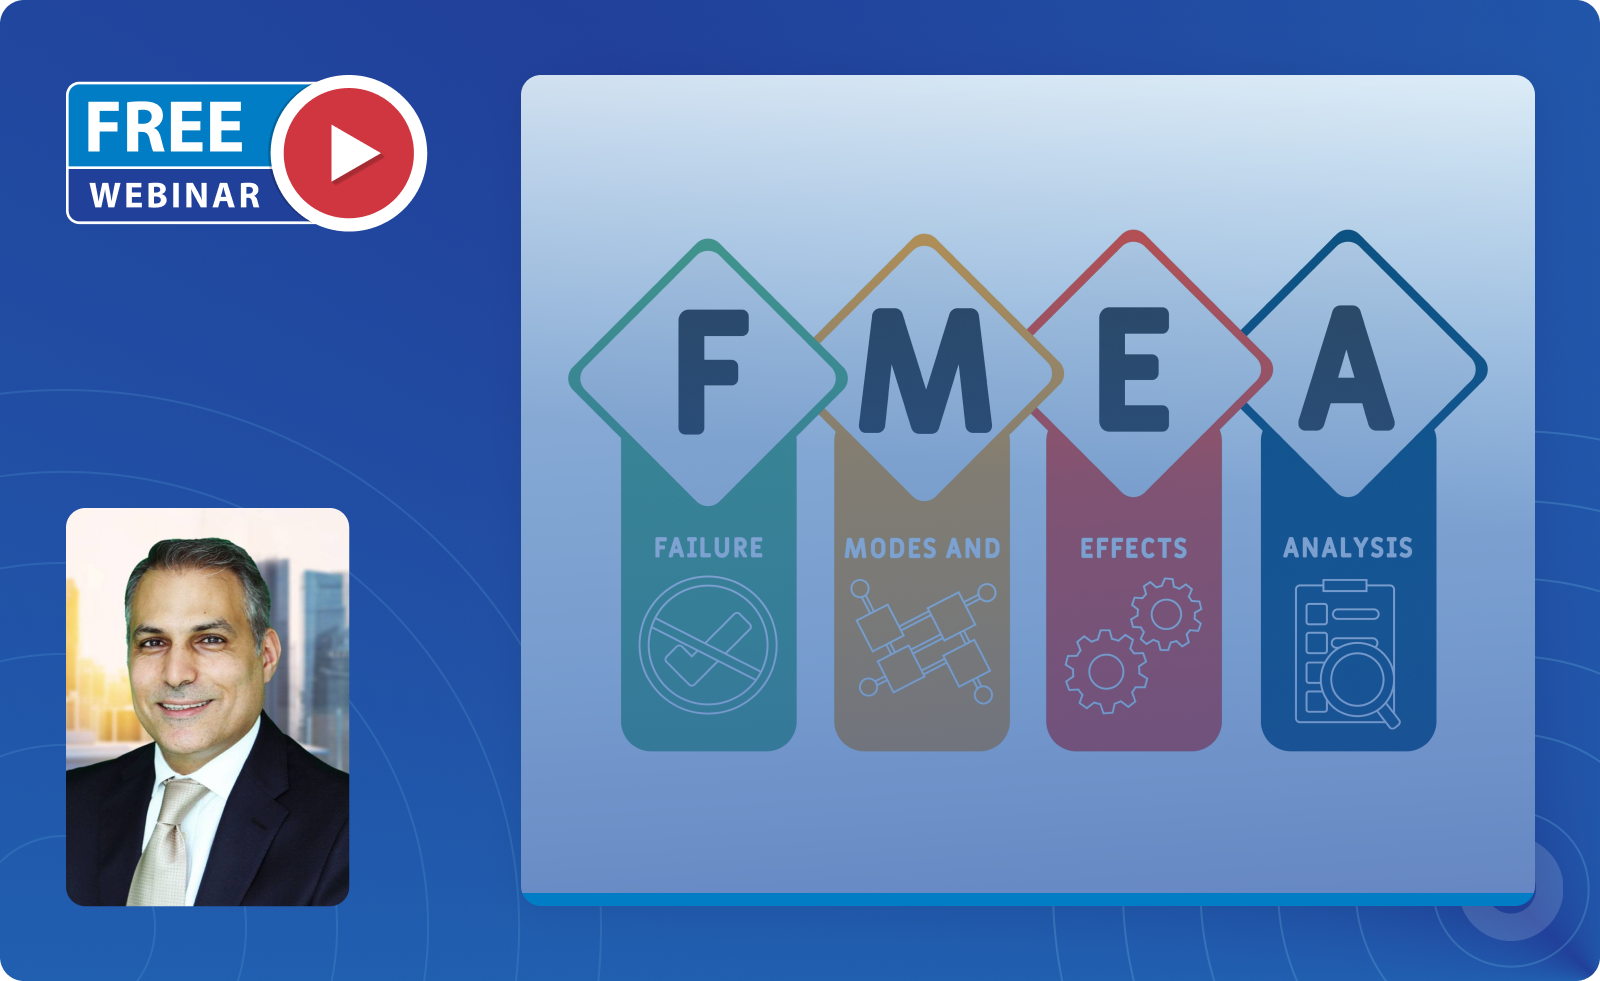 FMEA: Your Tool to Understand and Mitigate Risk in Processes and Operations